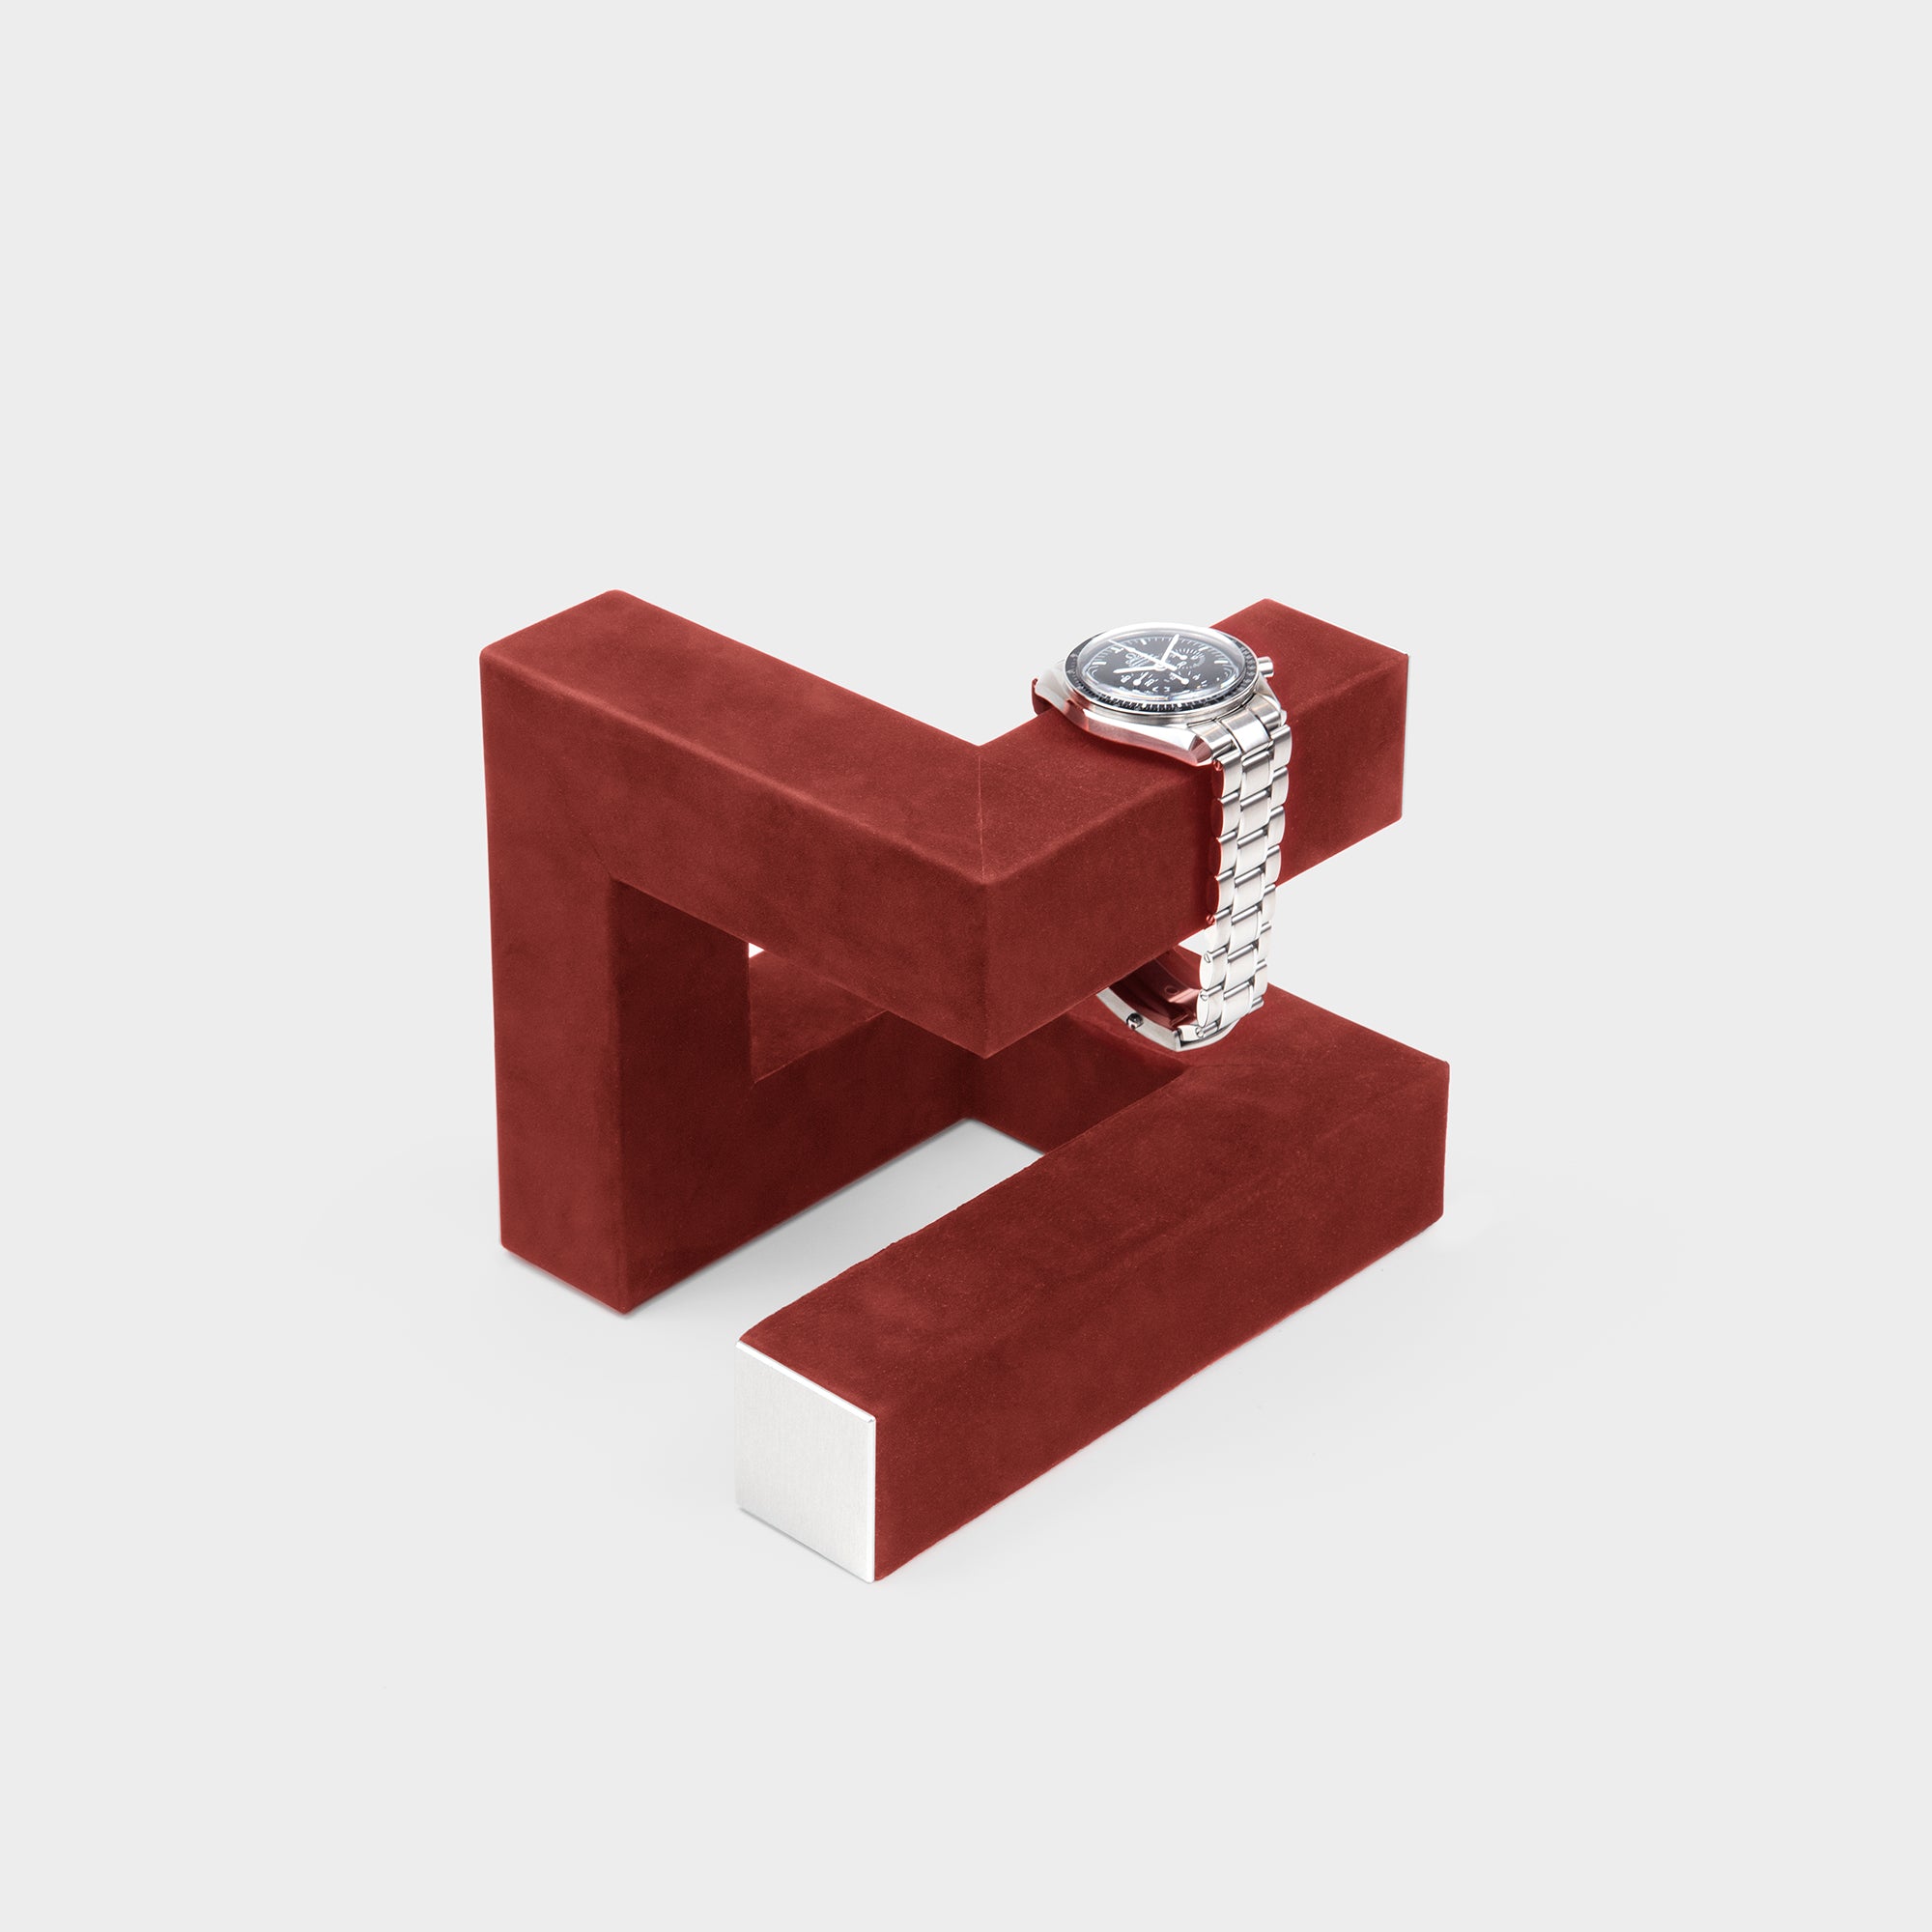 Charles Simon Hudson 3 watch stand holding luxury watch. Handmade in Canada from premium materials.